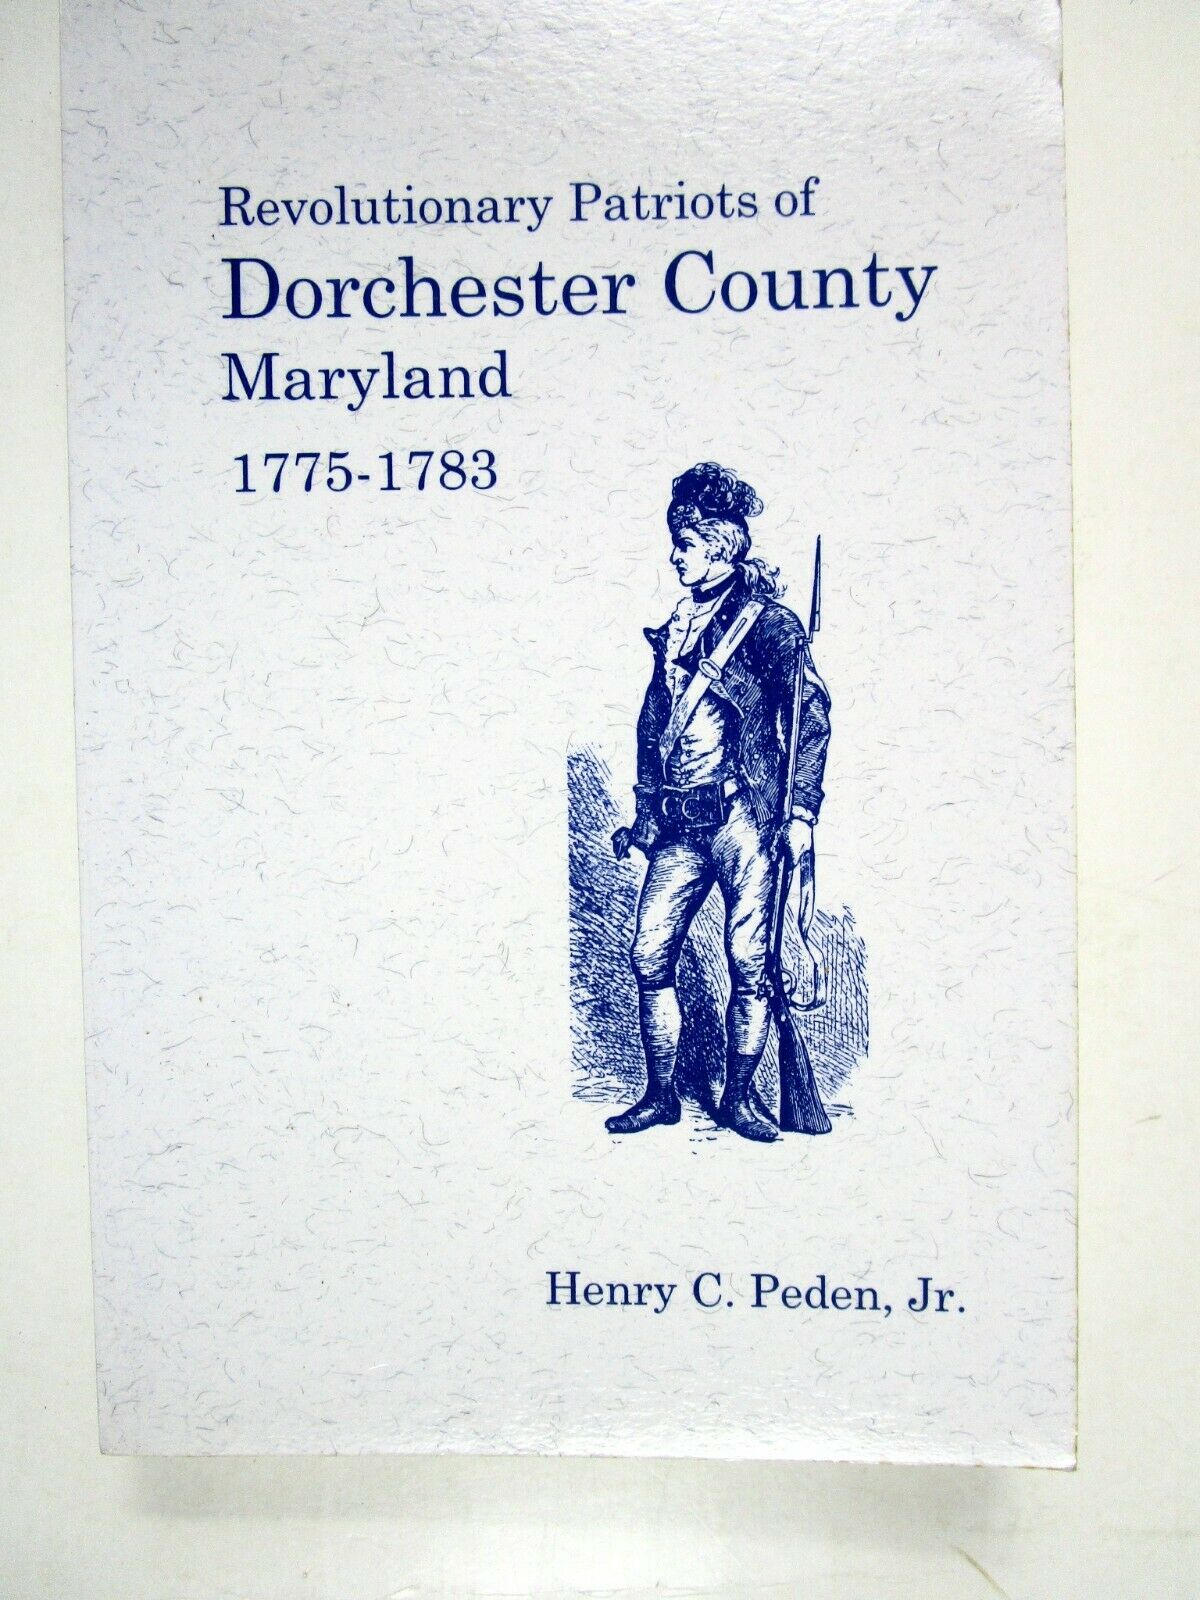 1998 Revolutionary Patriots Of Dorchester County, Maryland. Listing With Notes